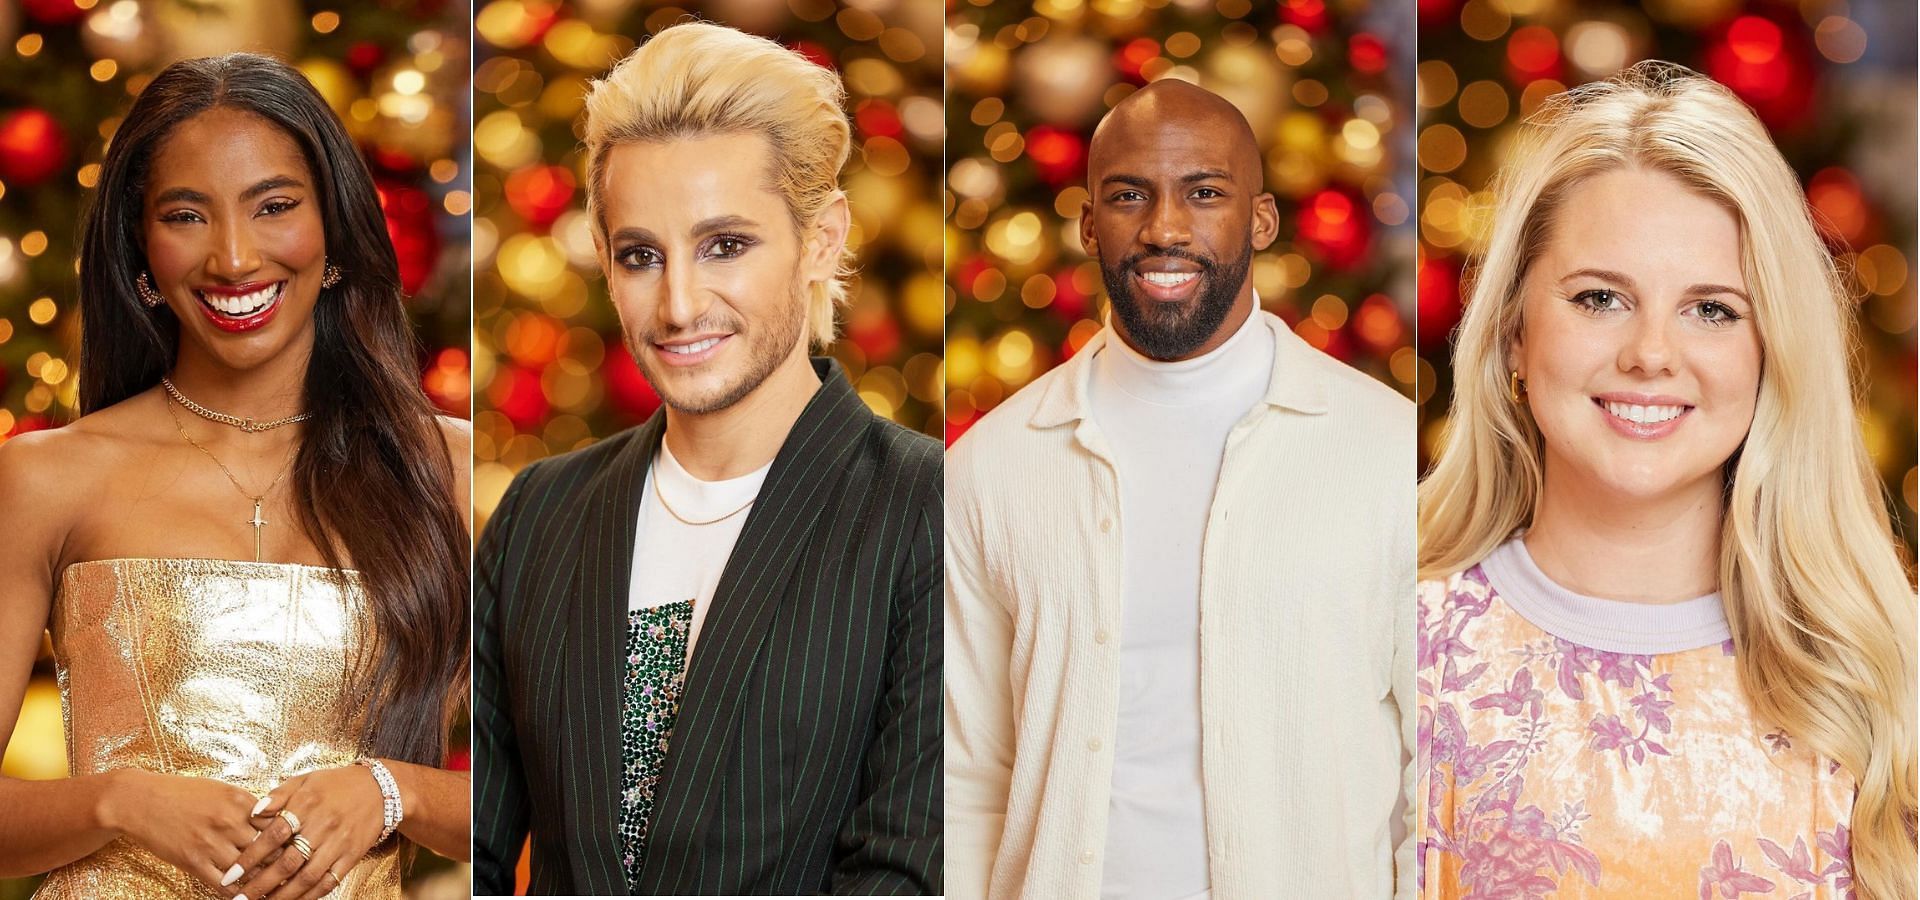 Who are the Final 4 in Big Brother Reindeer Games? Prize money and more